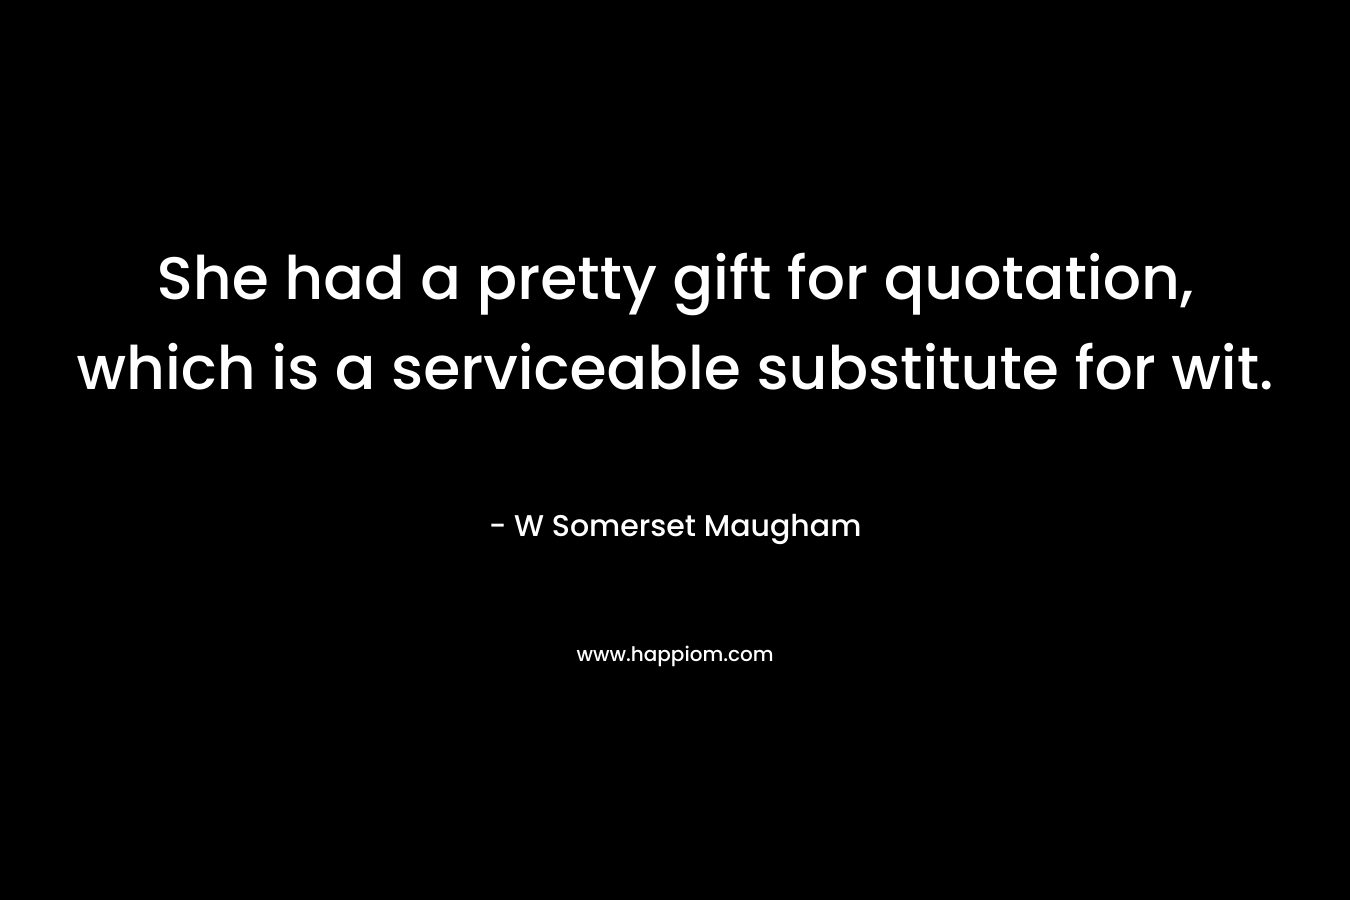 She had a pretty gift for quotation, which is a serviceable substitute for wit. – W Somerset Maugham